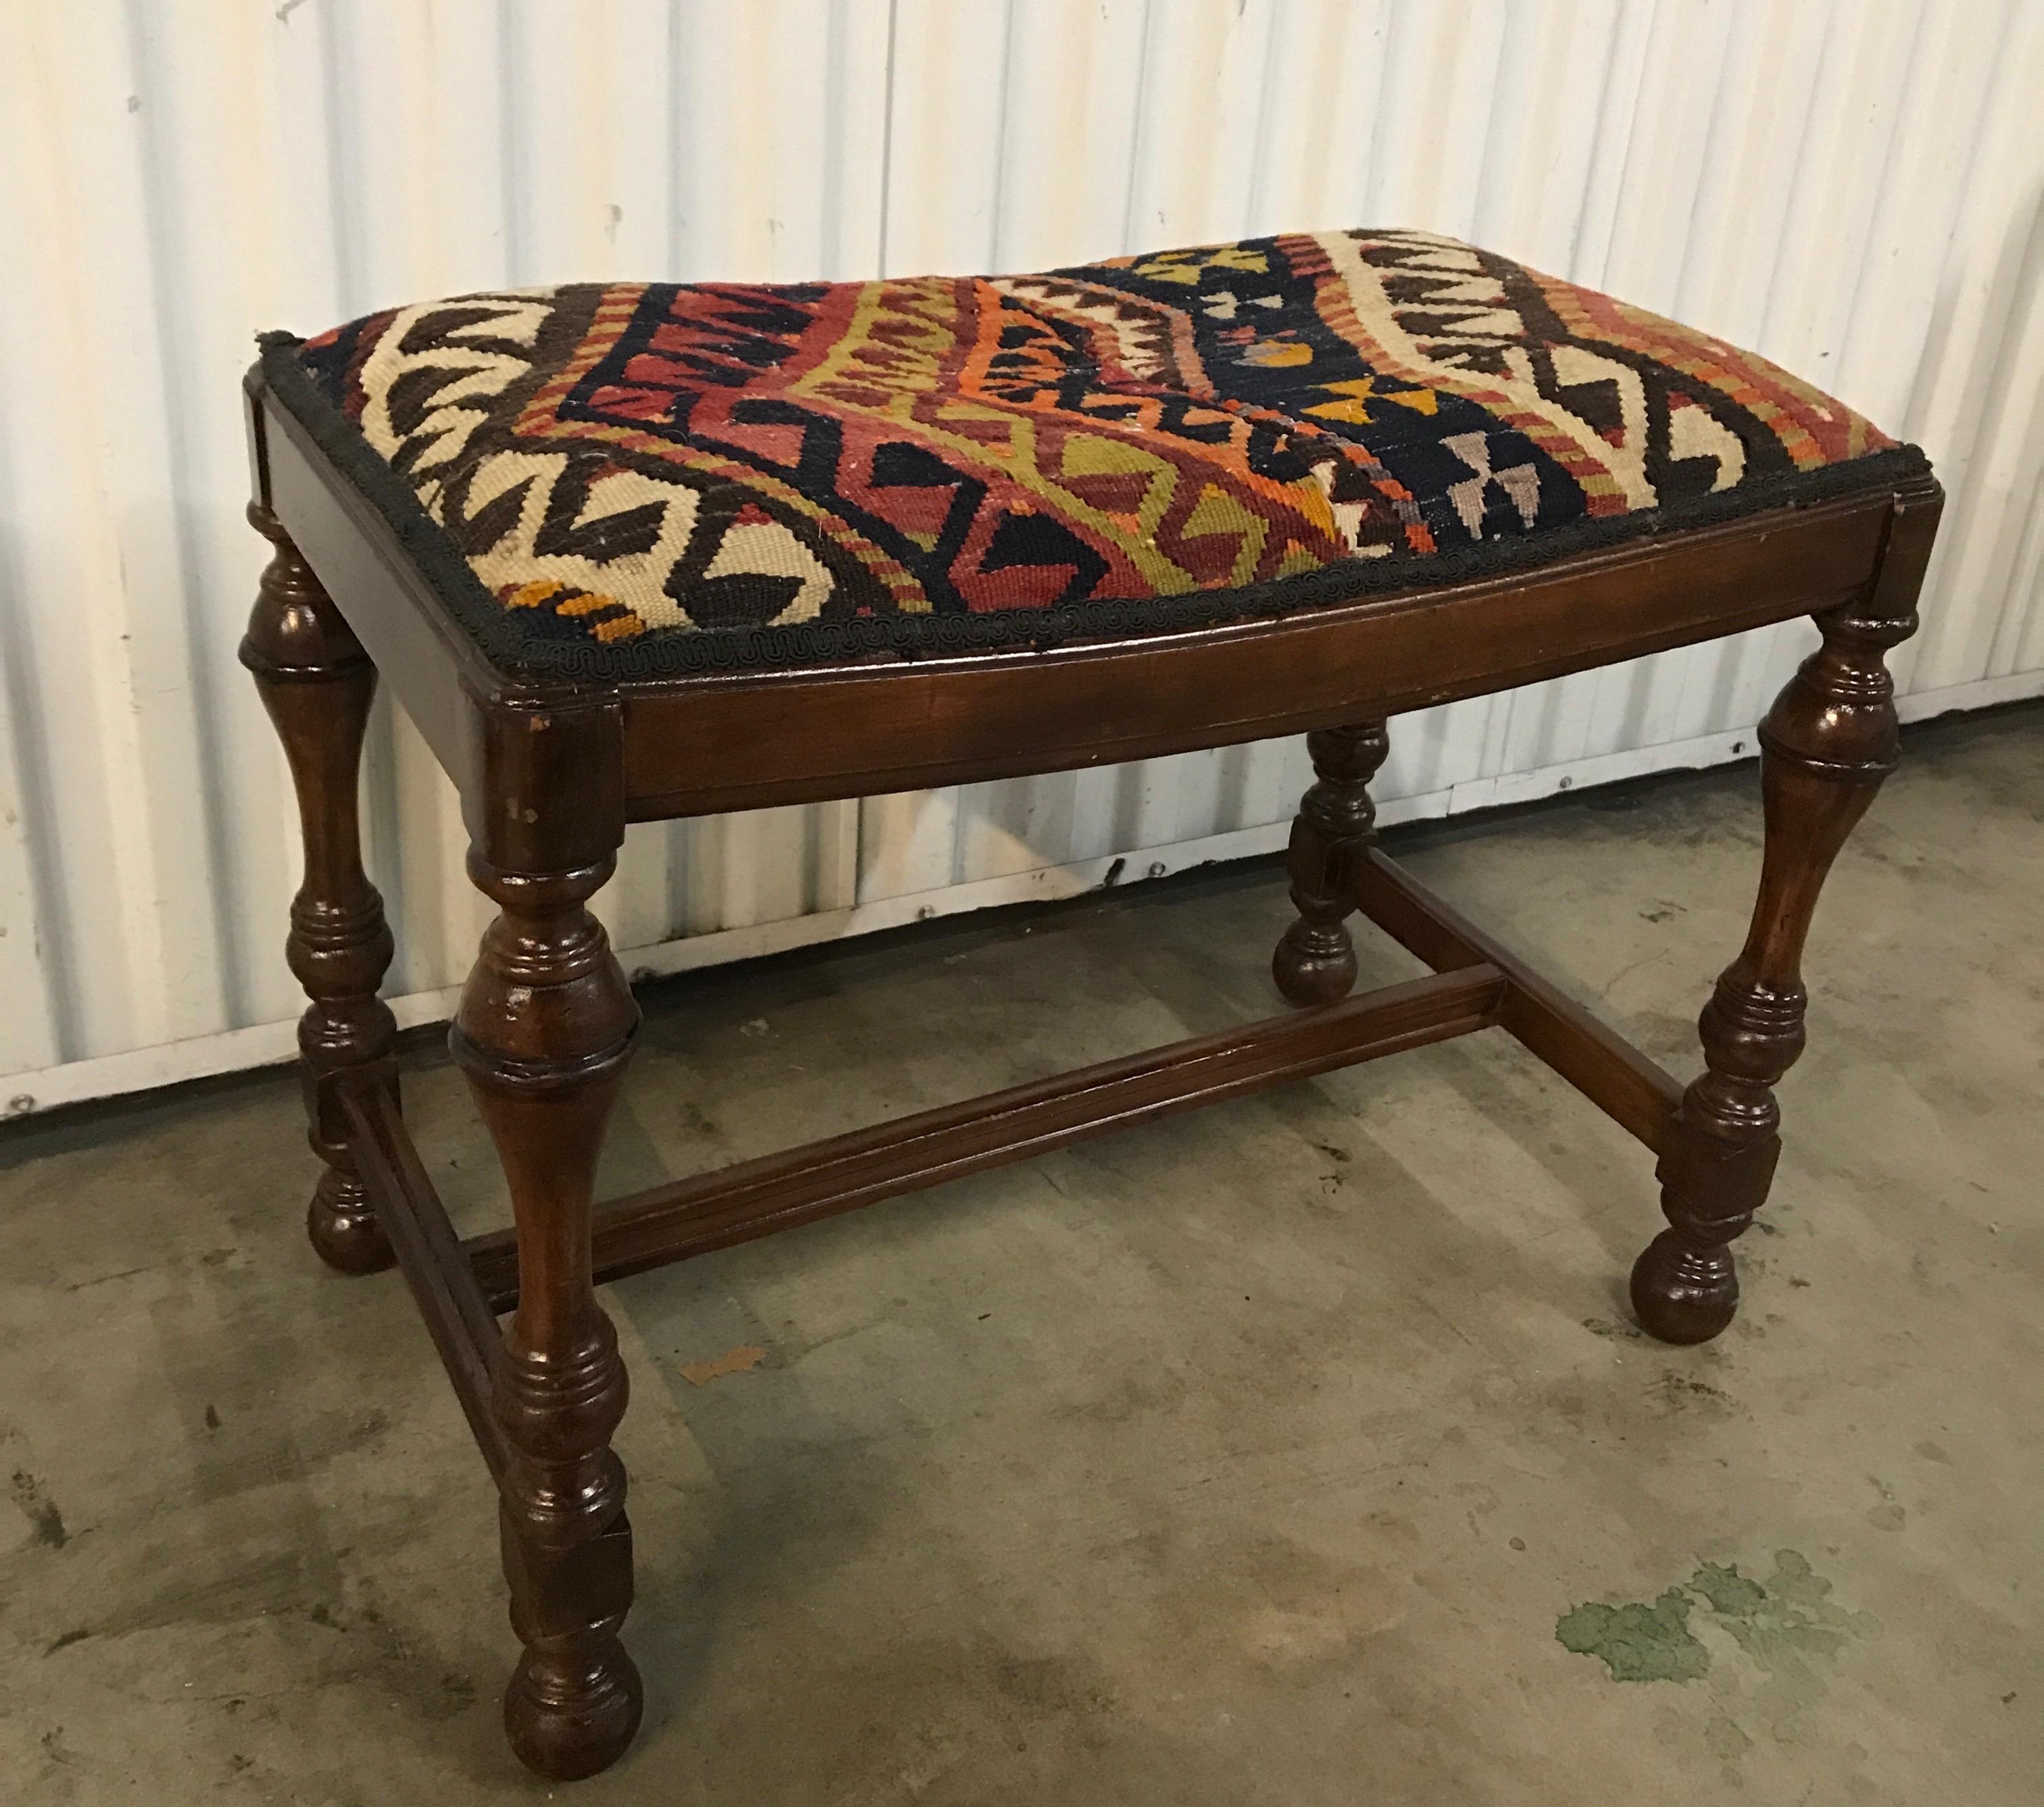 19th century William & Mary style bench with seat upholstered with antique Kilim.